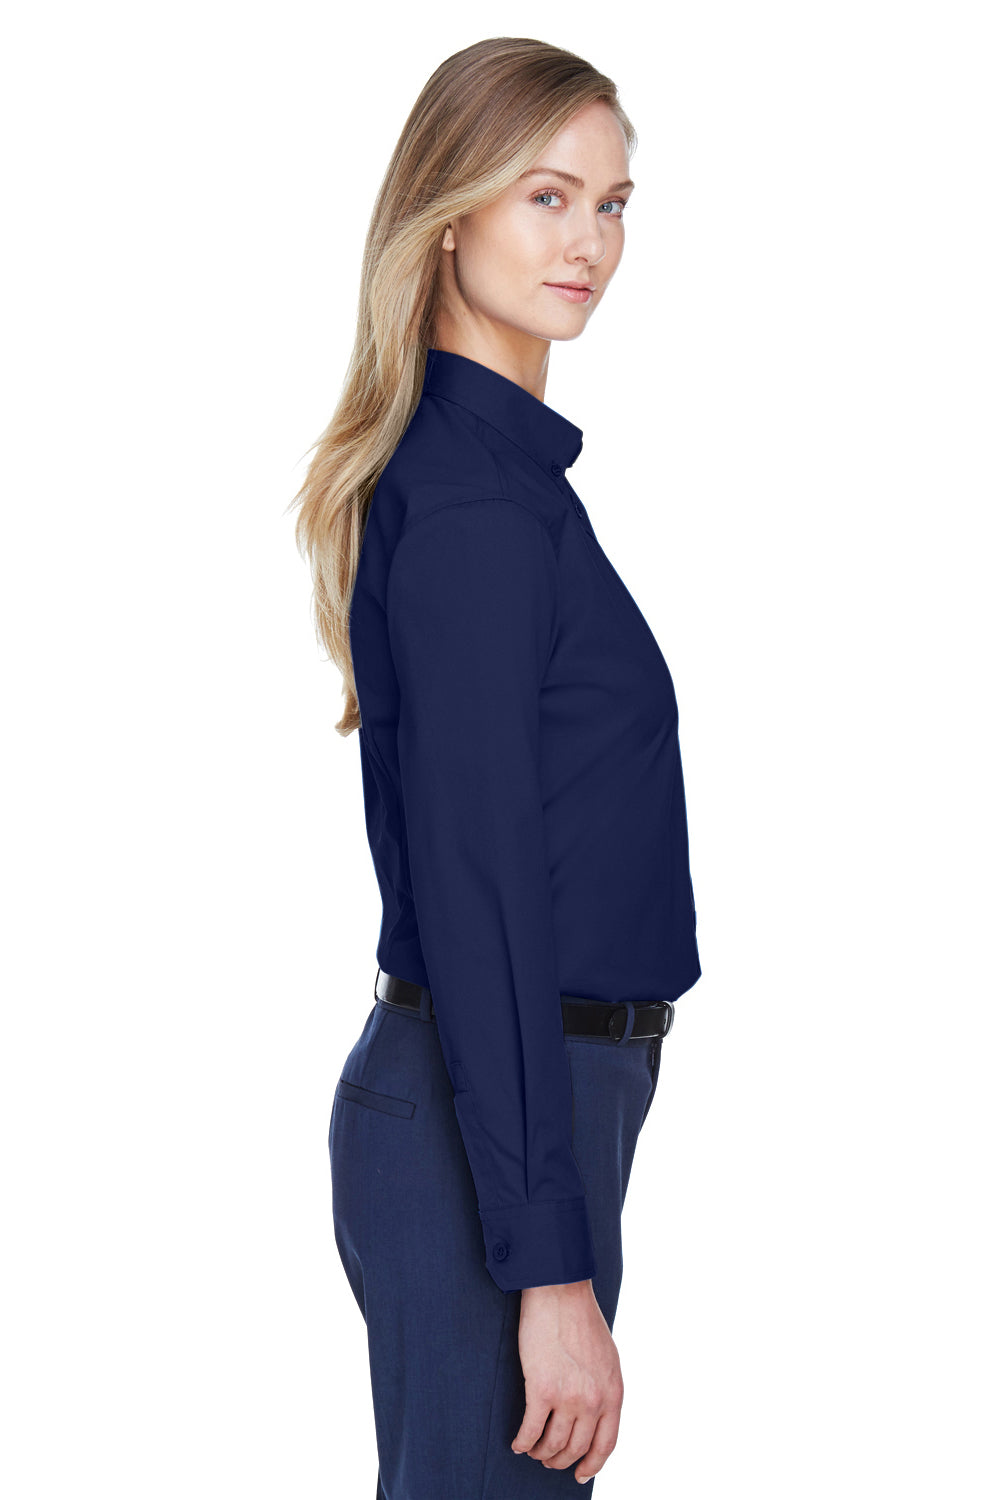 Core 365 78193 Womens Operate Long Sleeve Button Down Shirt Navy Blue Side